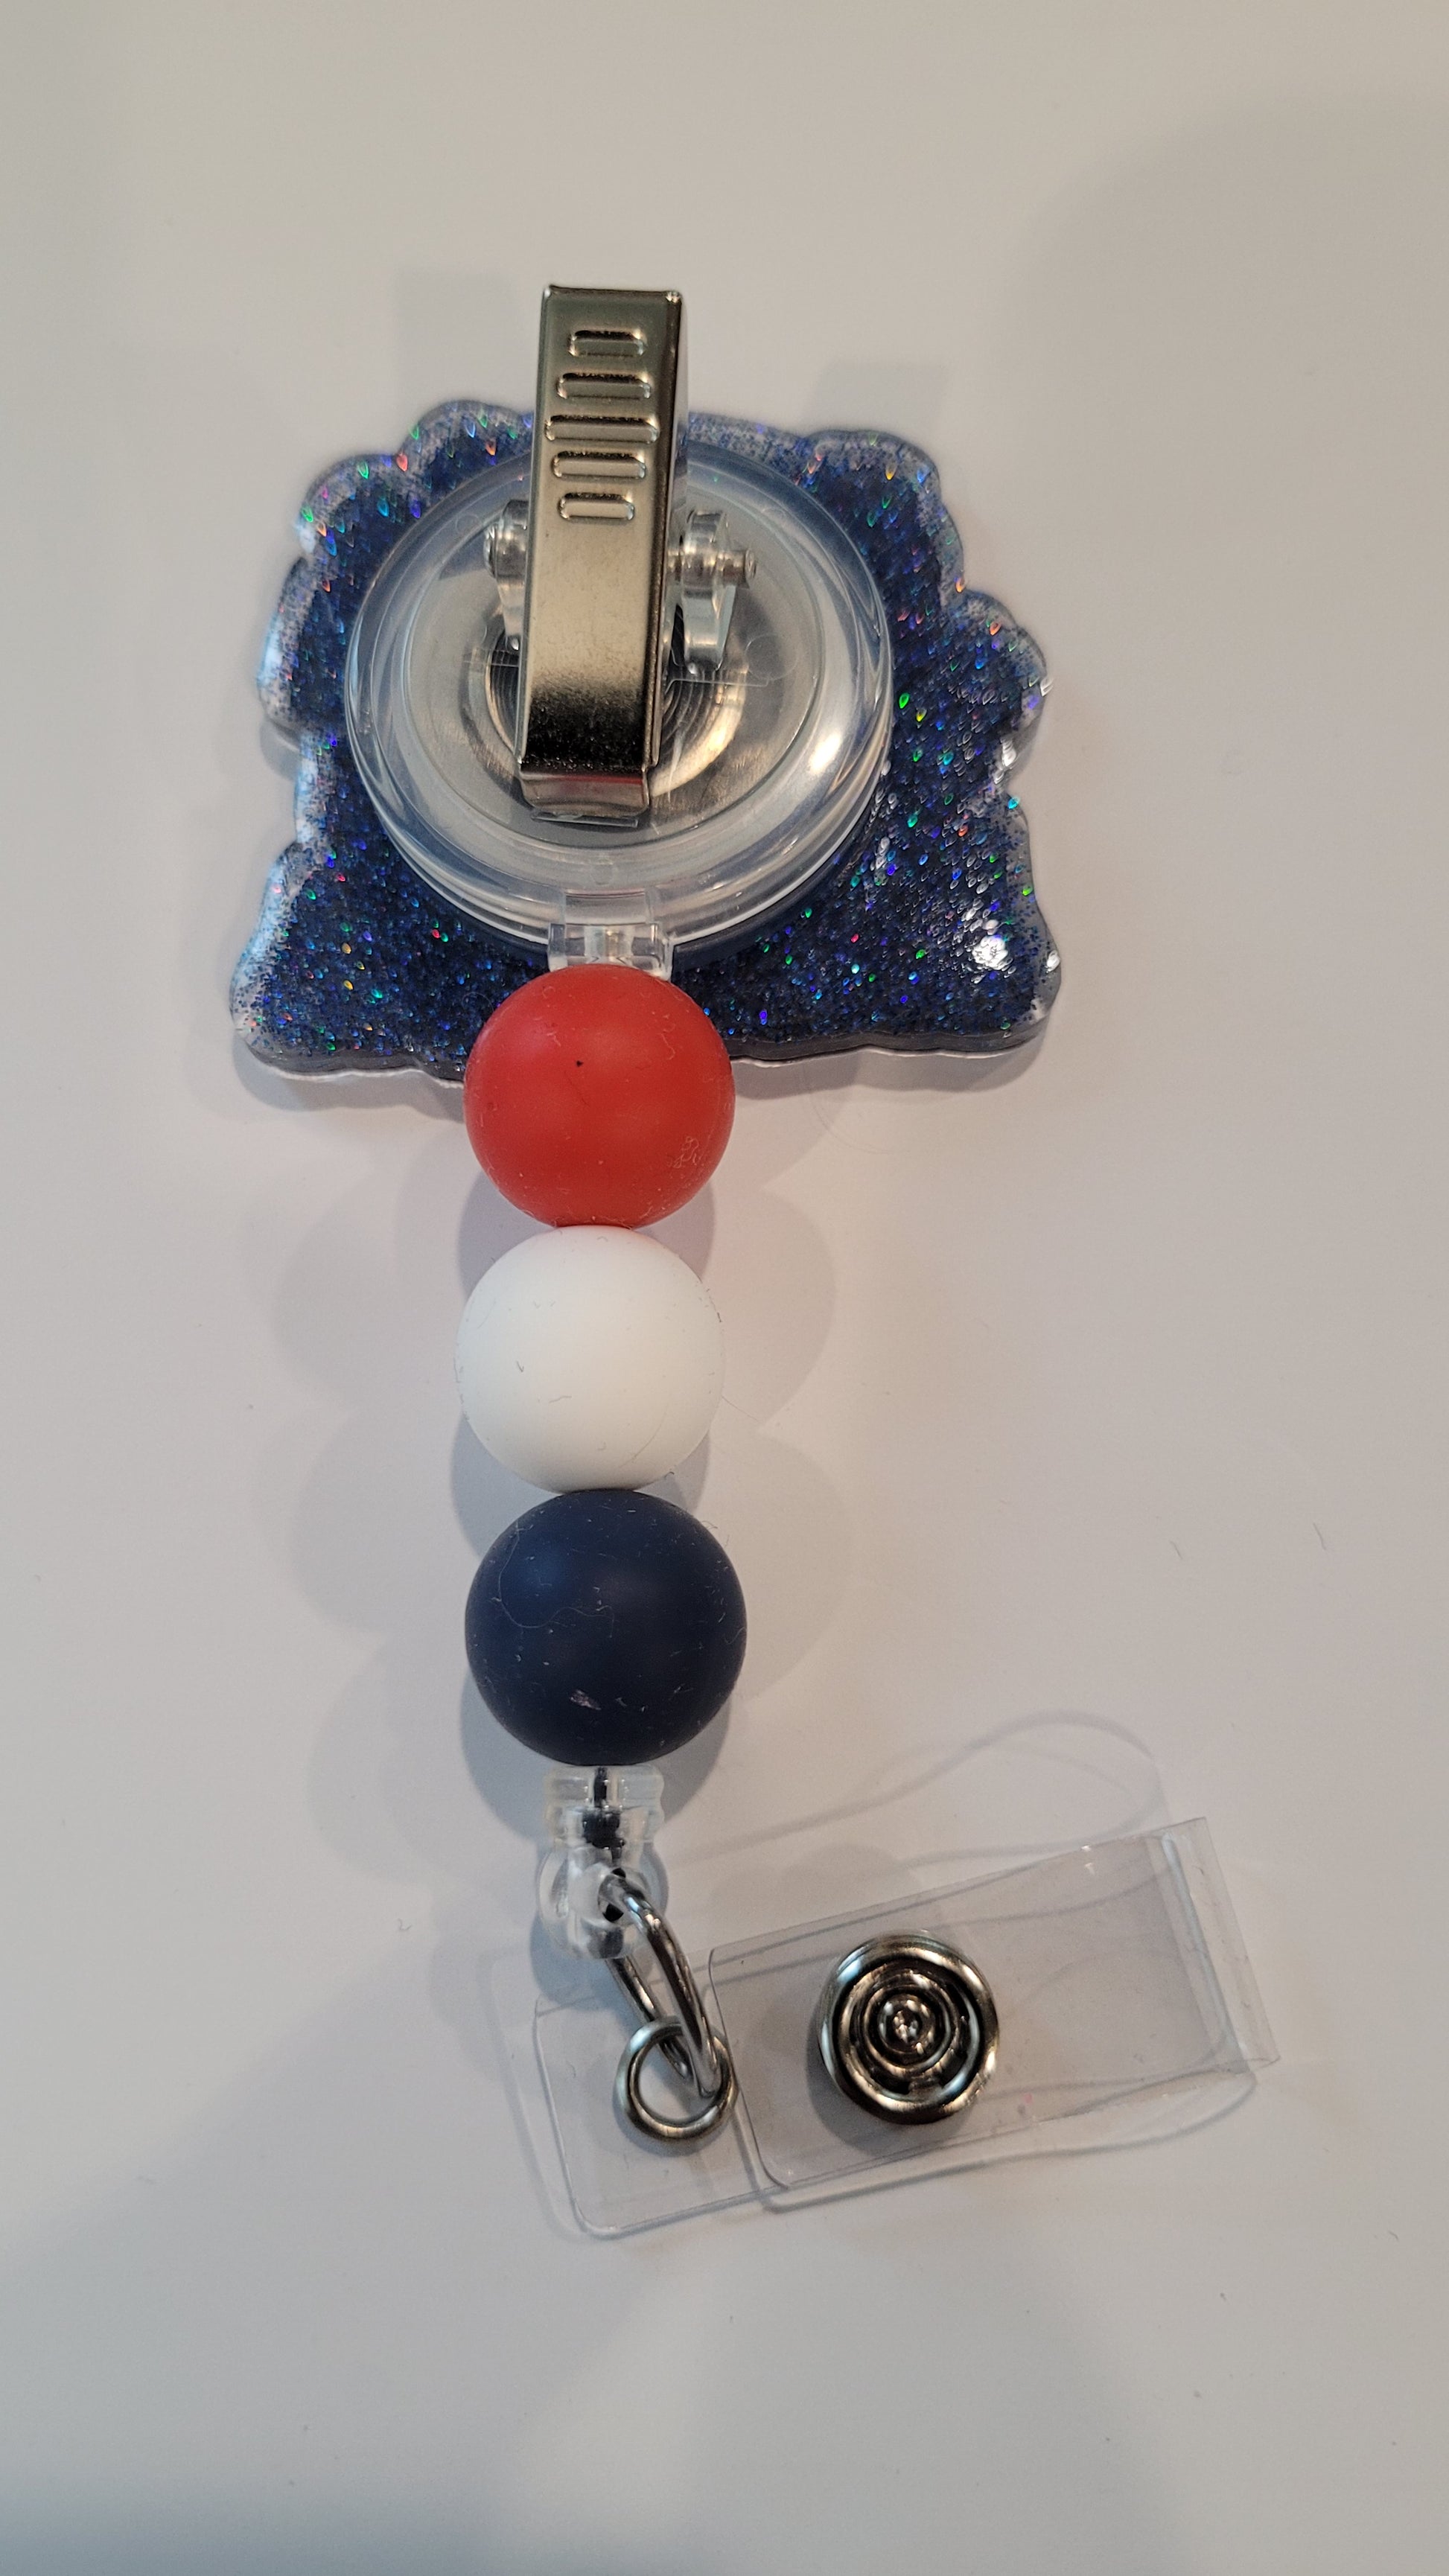 Experience America like never before with the Badge Reel America Alien Style! Embrace the summer spirit with cookouts, fireworks, ice cream, and everyone's favorite little blue alien. A dazzling blue glitter backing and 3 color-coordinated silicone beads add the perfect finishing touch to this out-of-this-world badge reel.